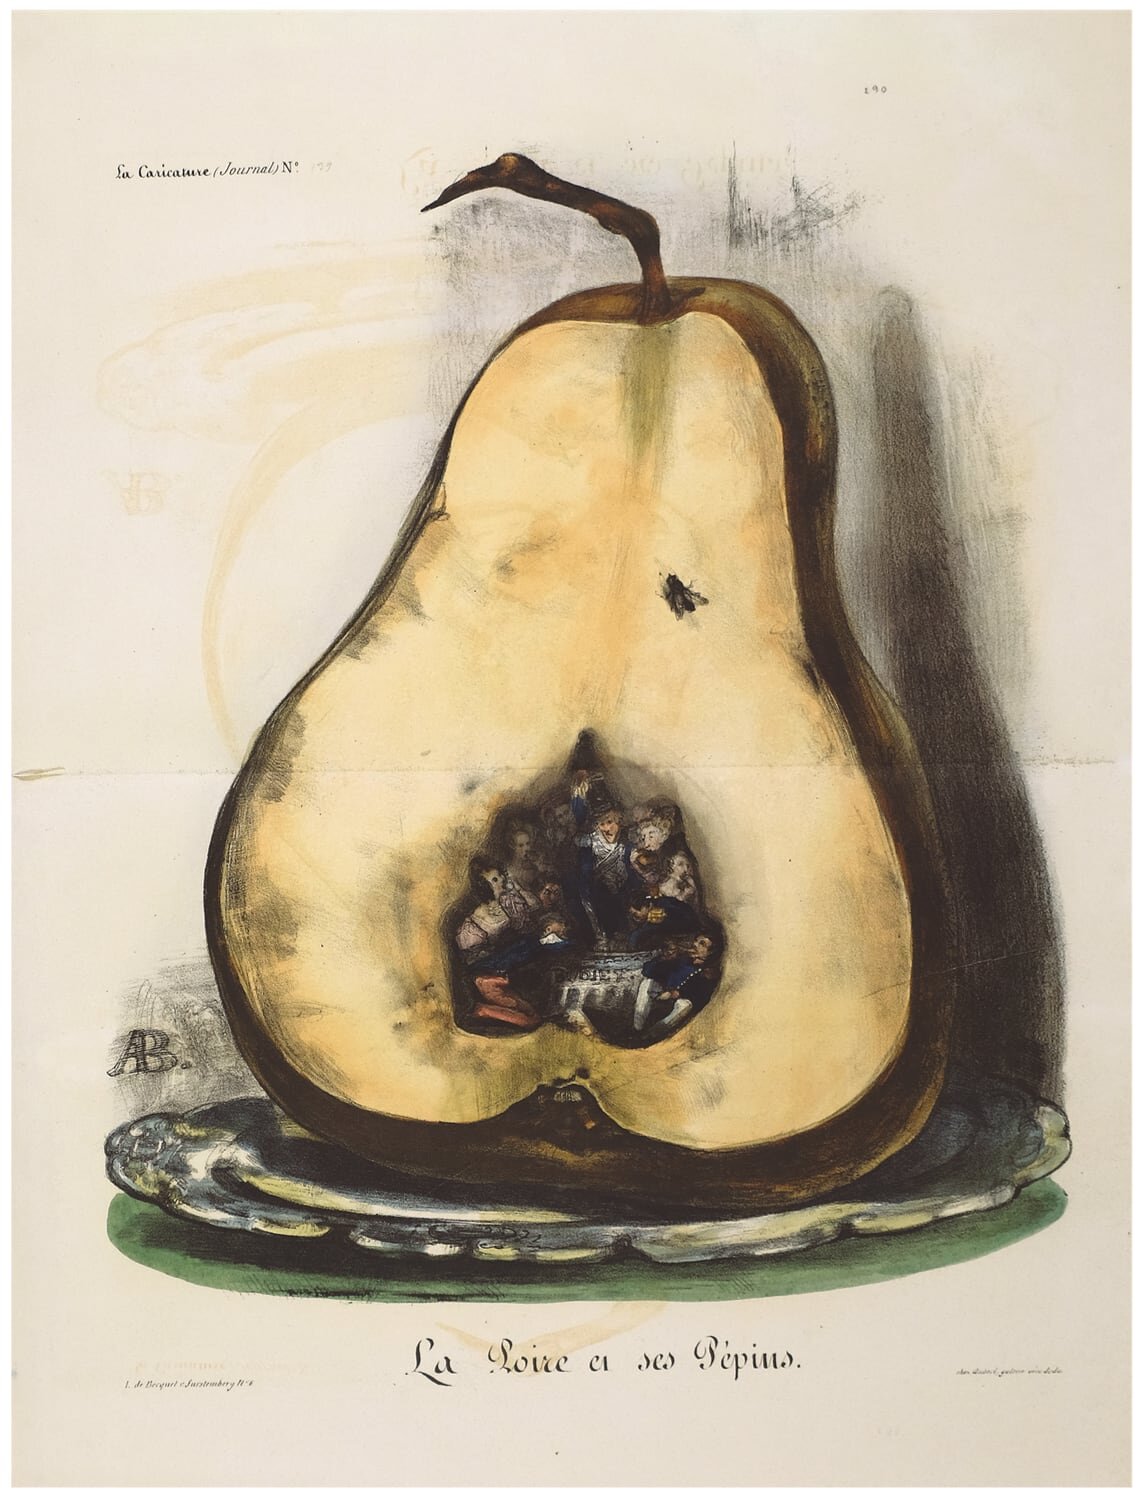  The image of the pear came to symbolically satirise the king 